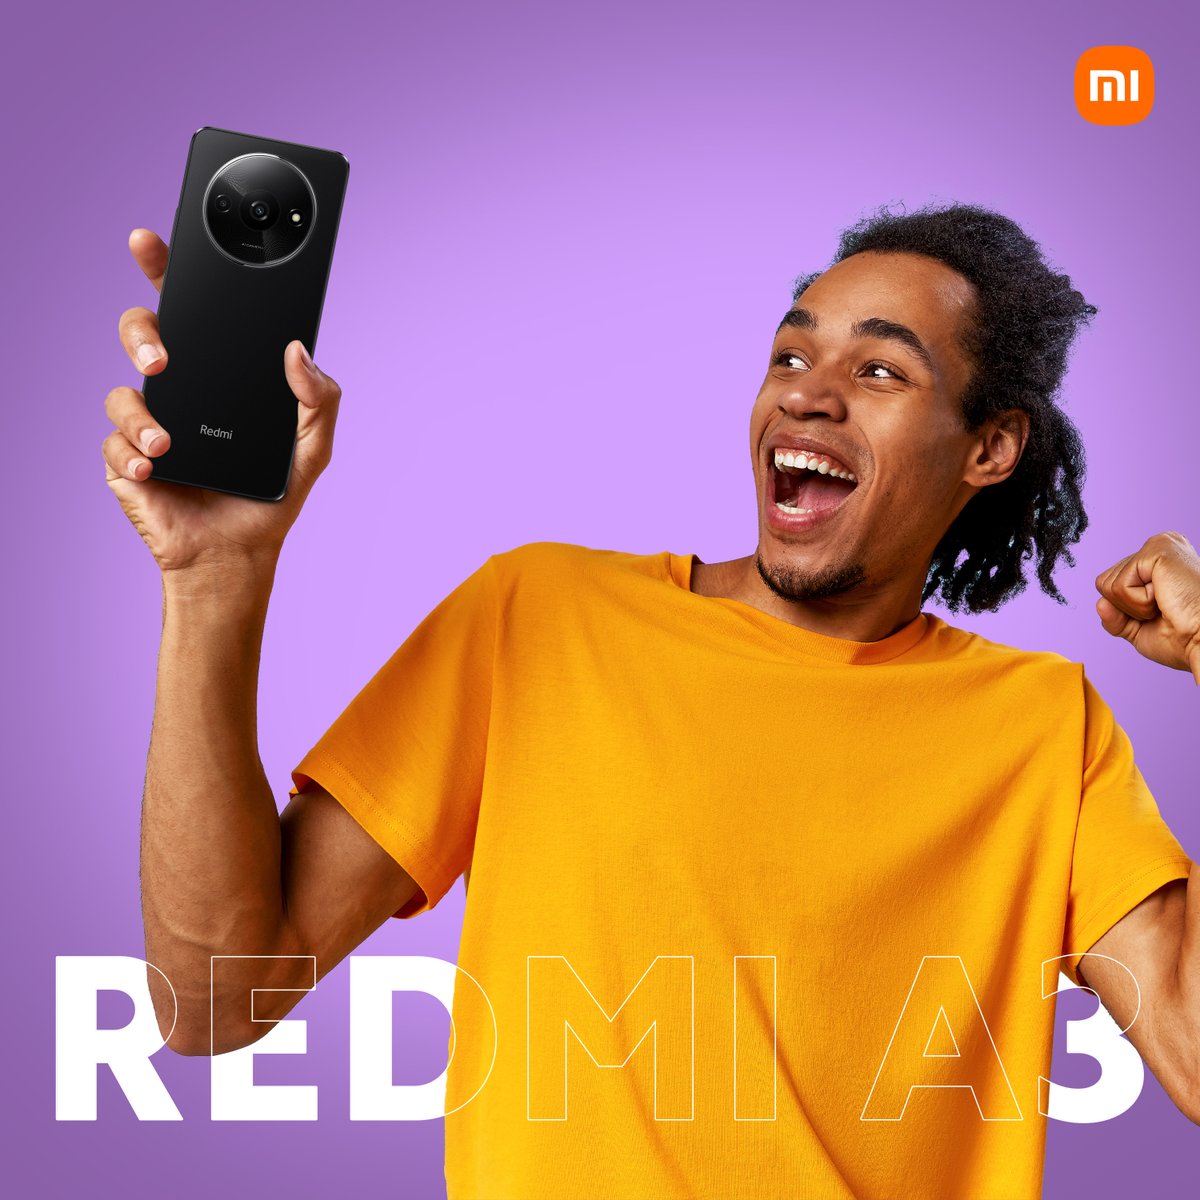 Stand out from the crowd with the sleek and stylish Redmi A3😎